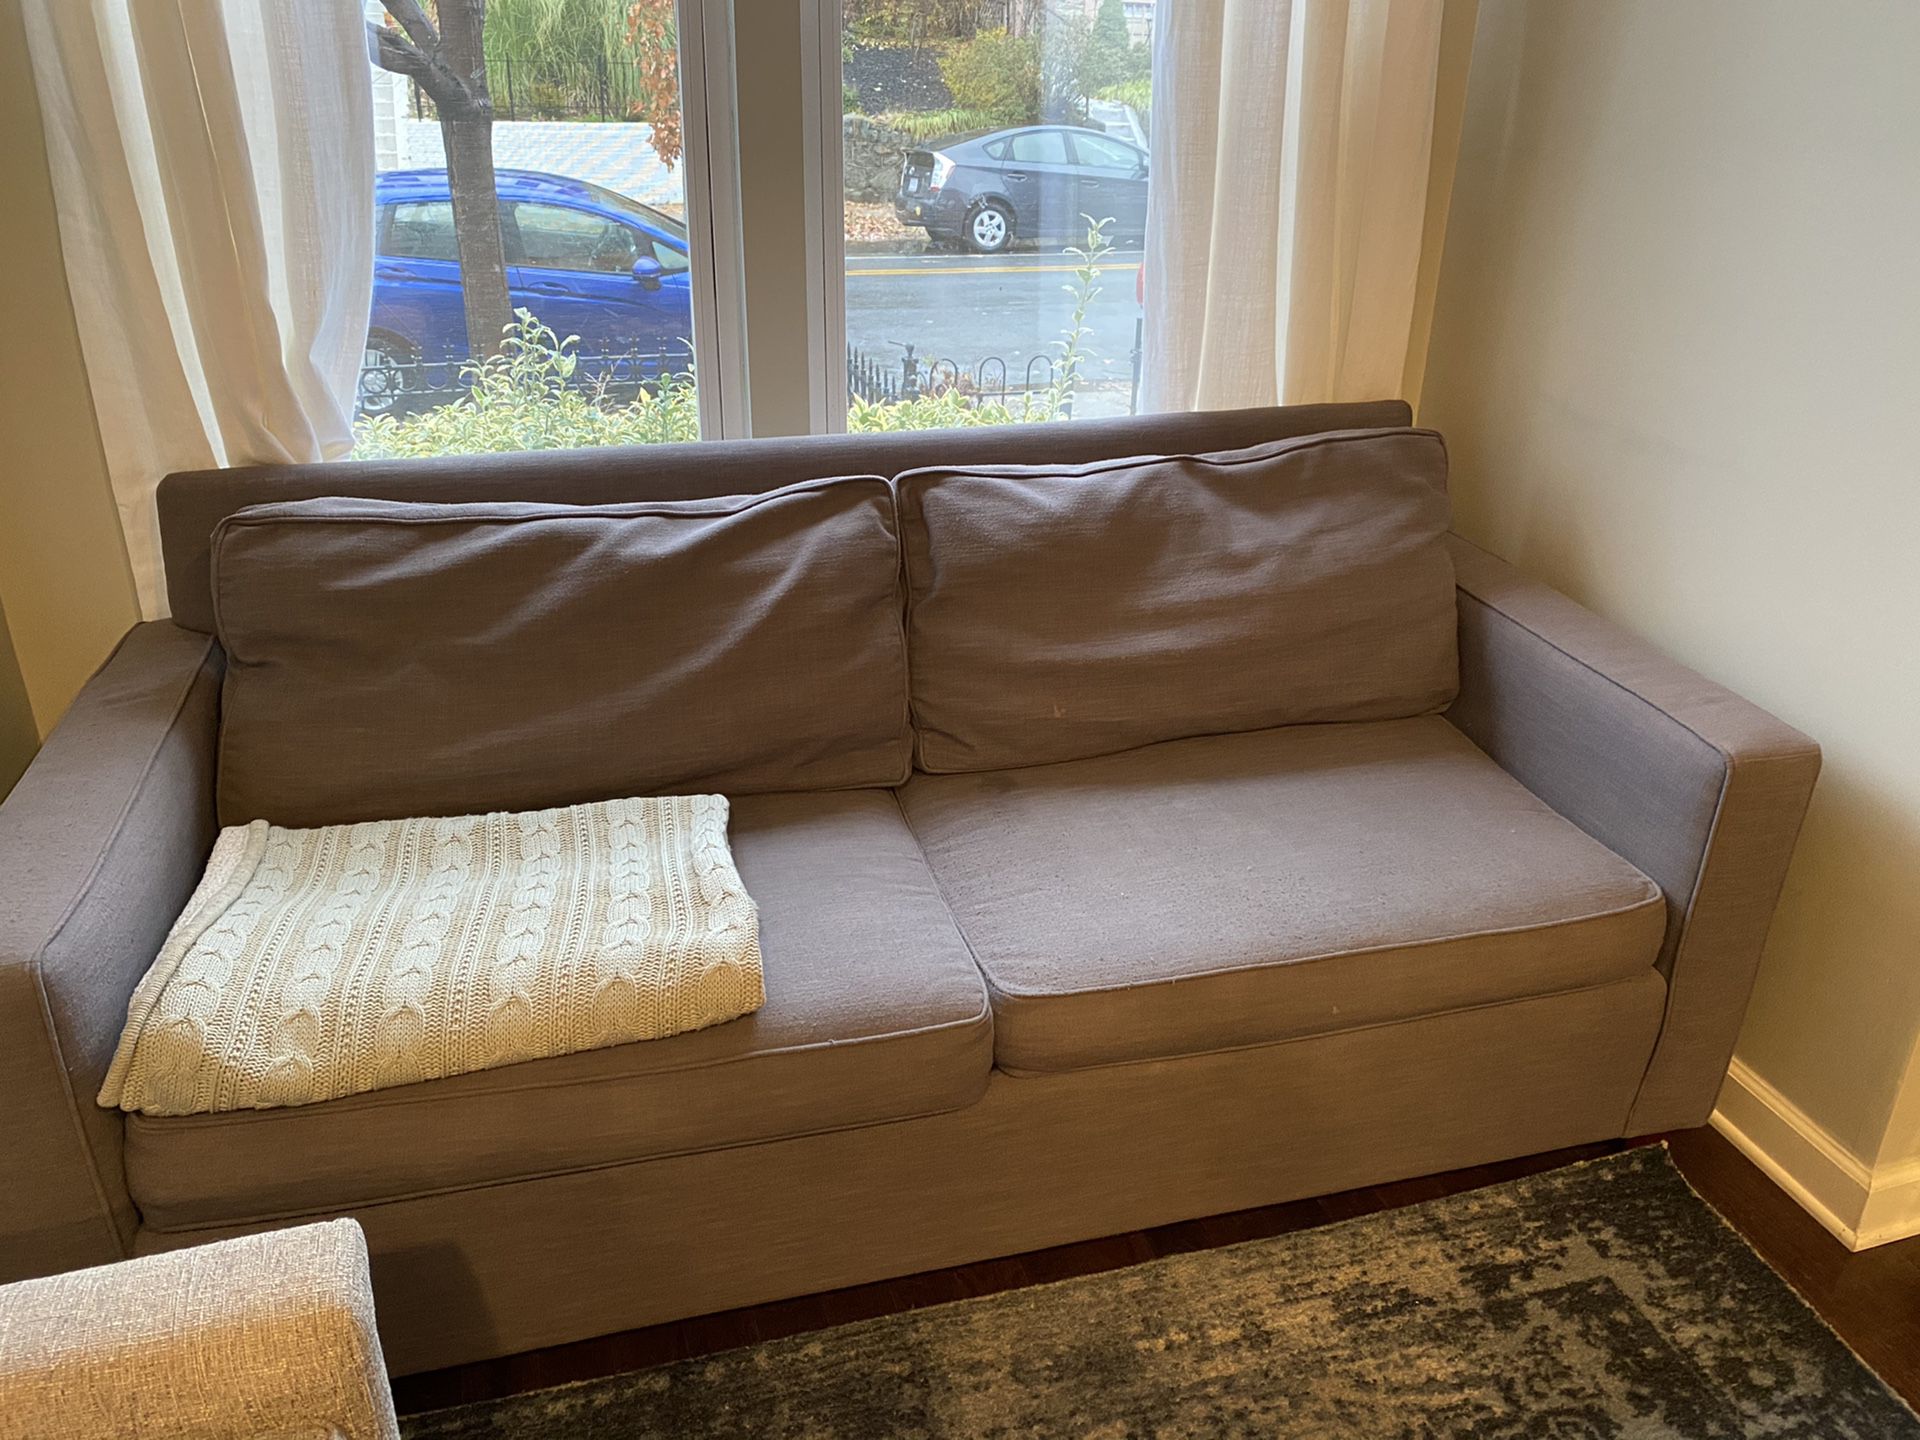 FREE West Elm Sleeper Couch!!